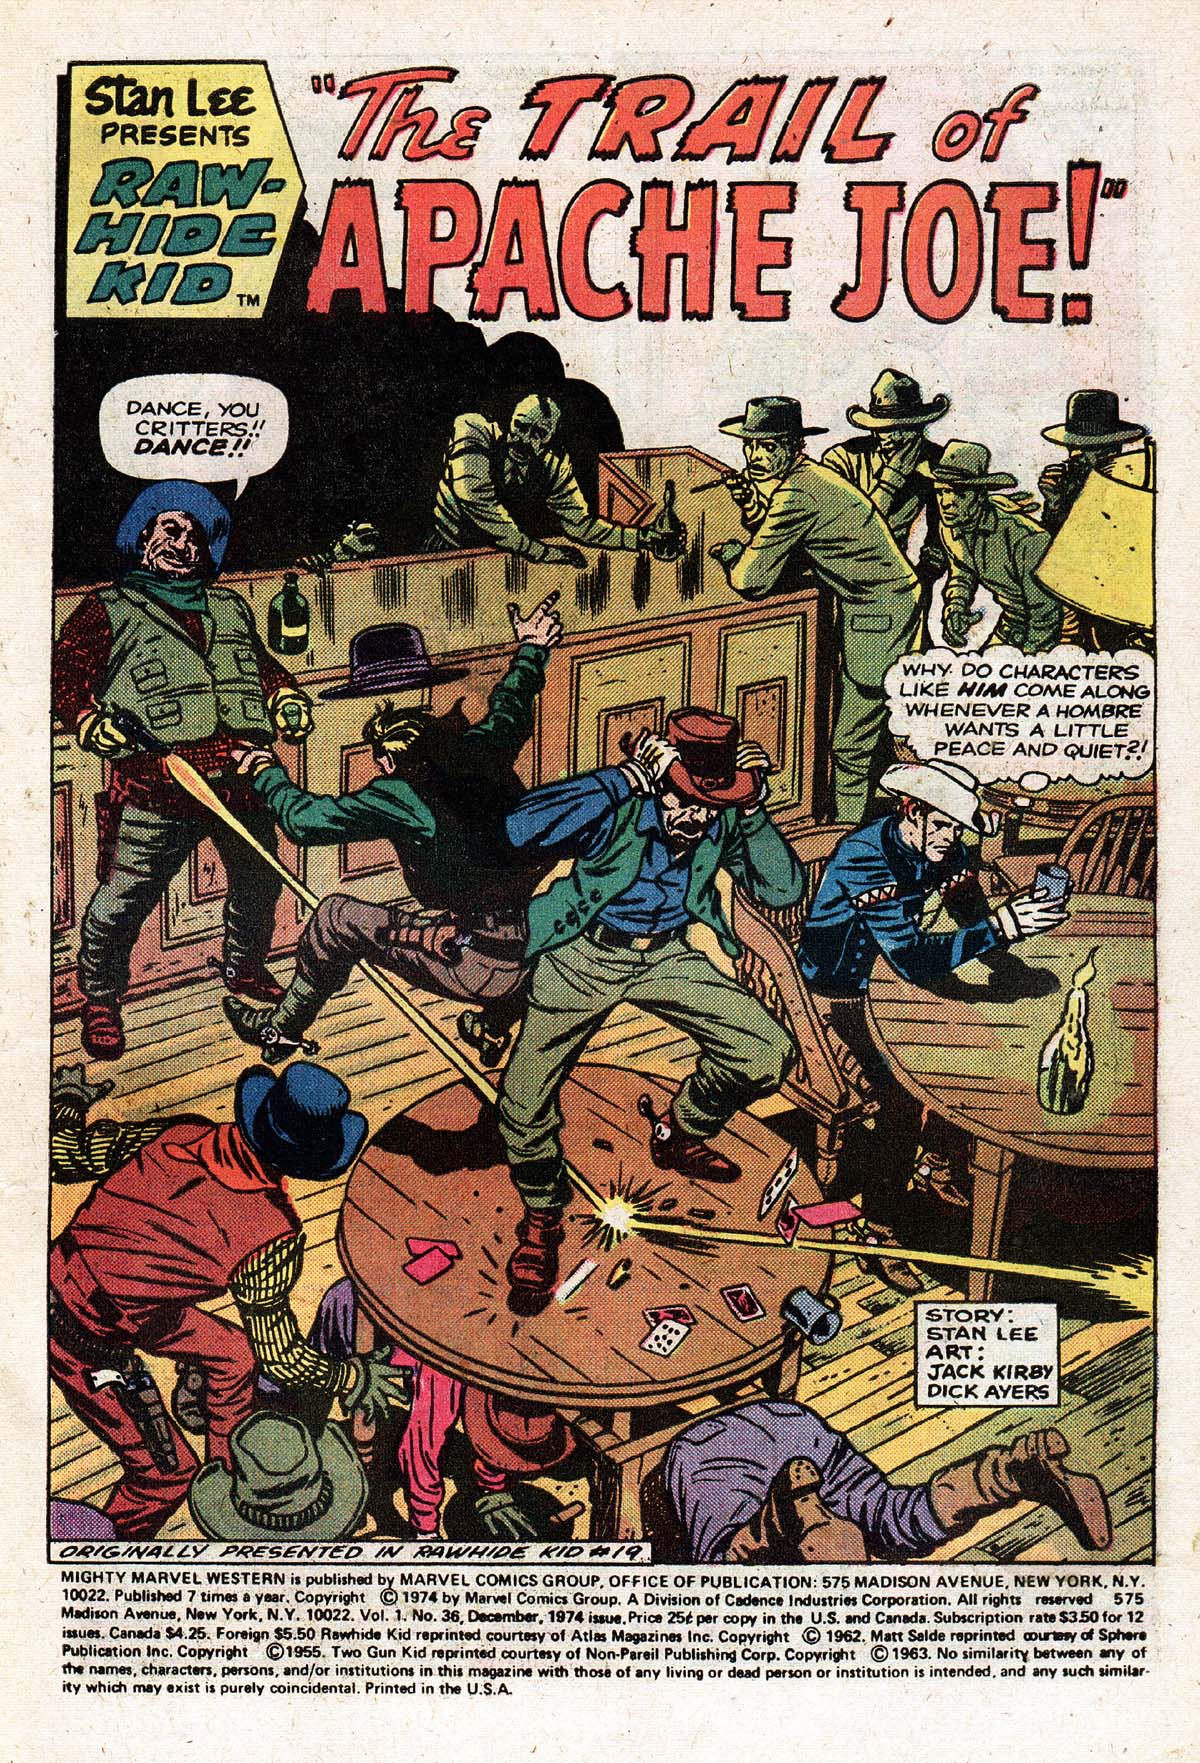 Read online The Mighty Marvel Western comic -  Issue #36 - 2